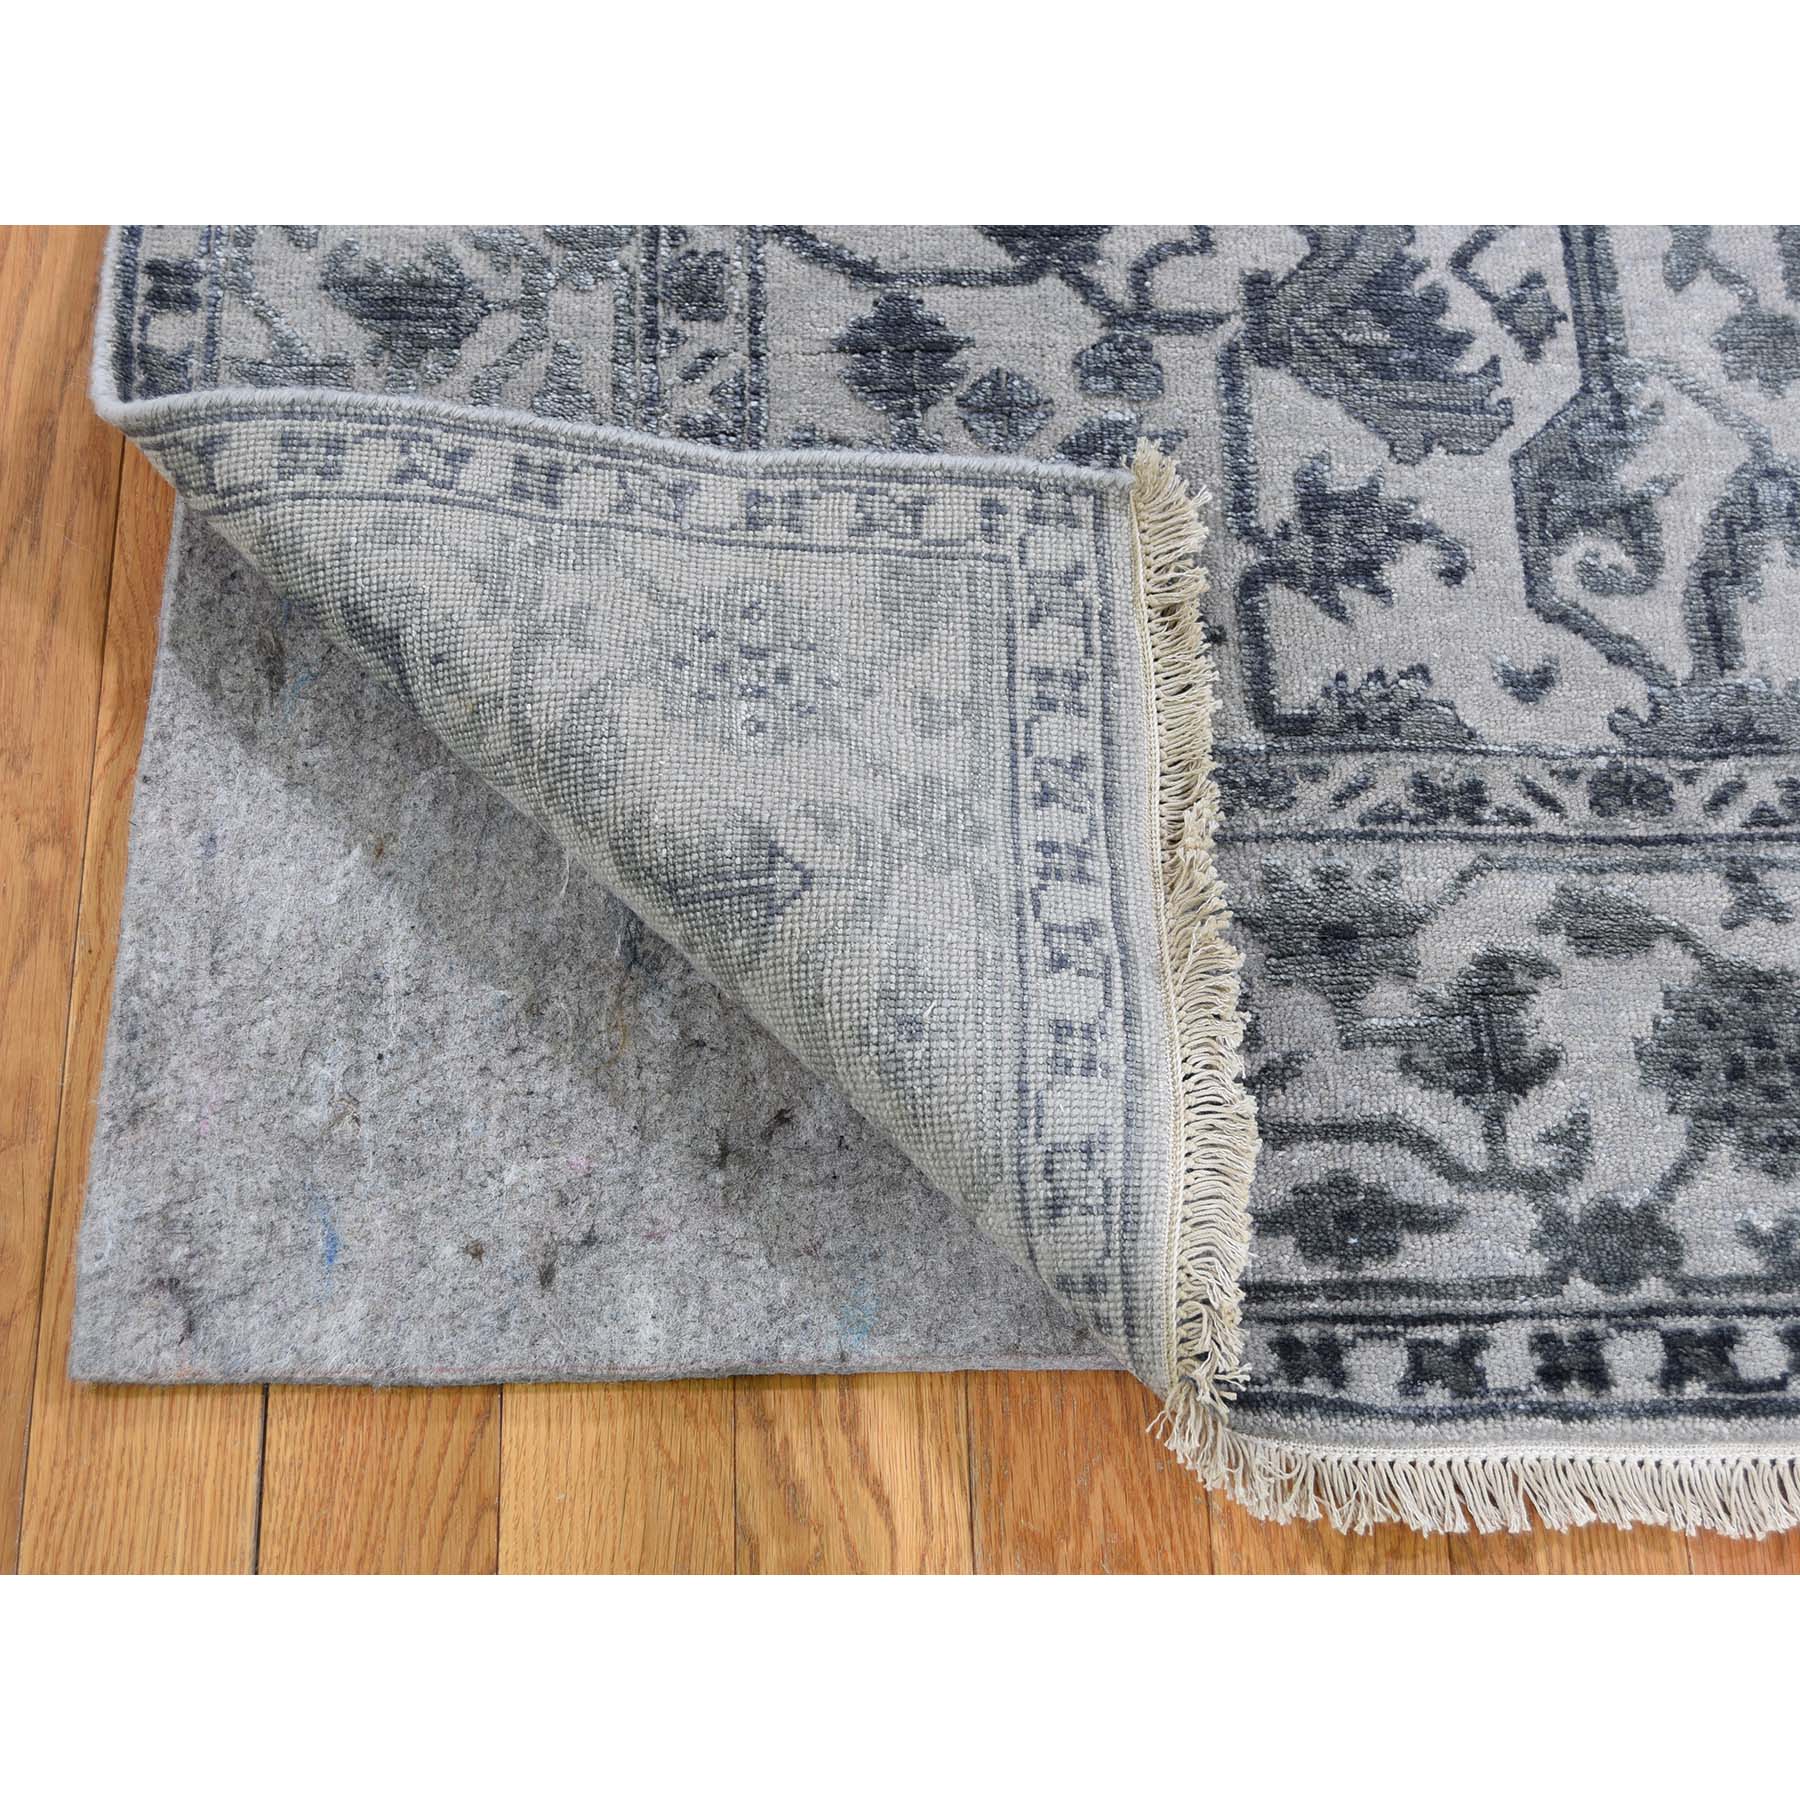 6-x9-1  Silver Heriz Design Wool And Silk Hi-lo Pile Hand-Knotted Oriental Rug 